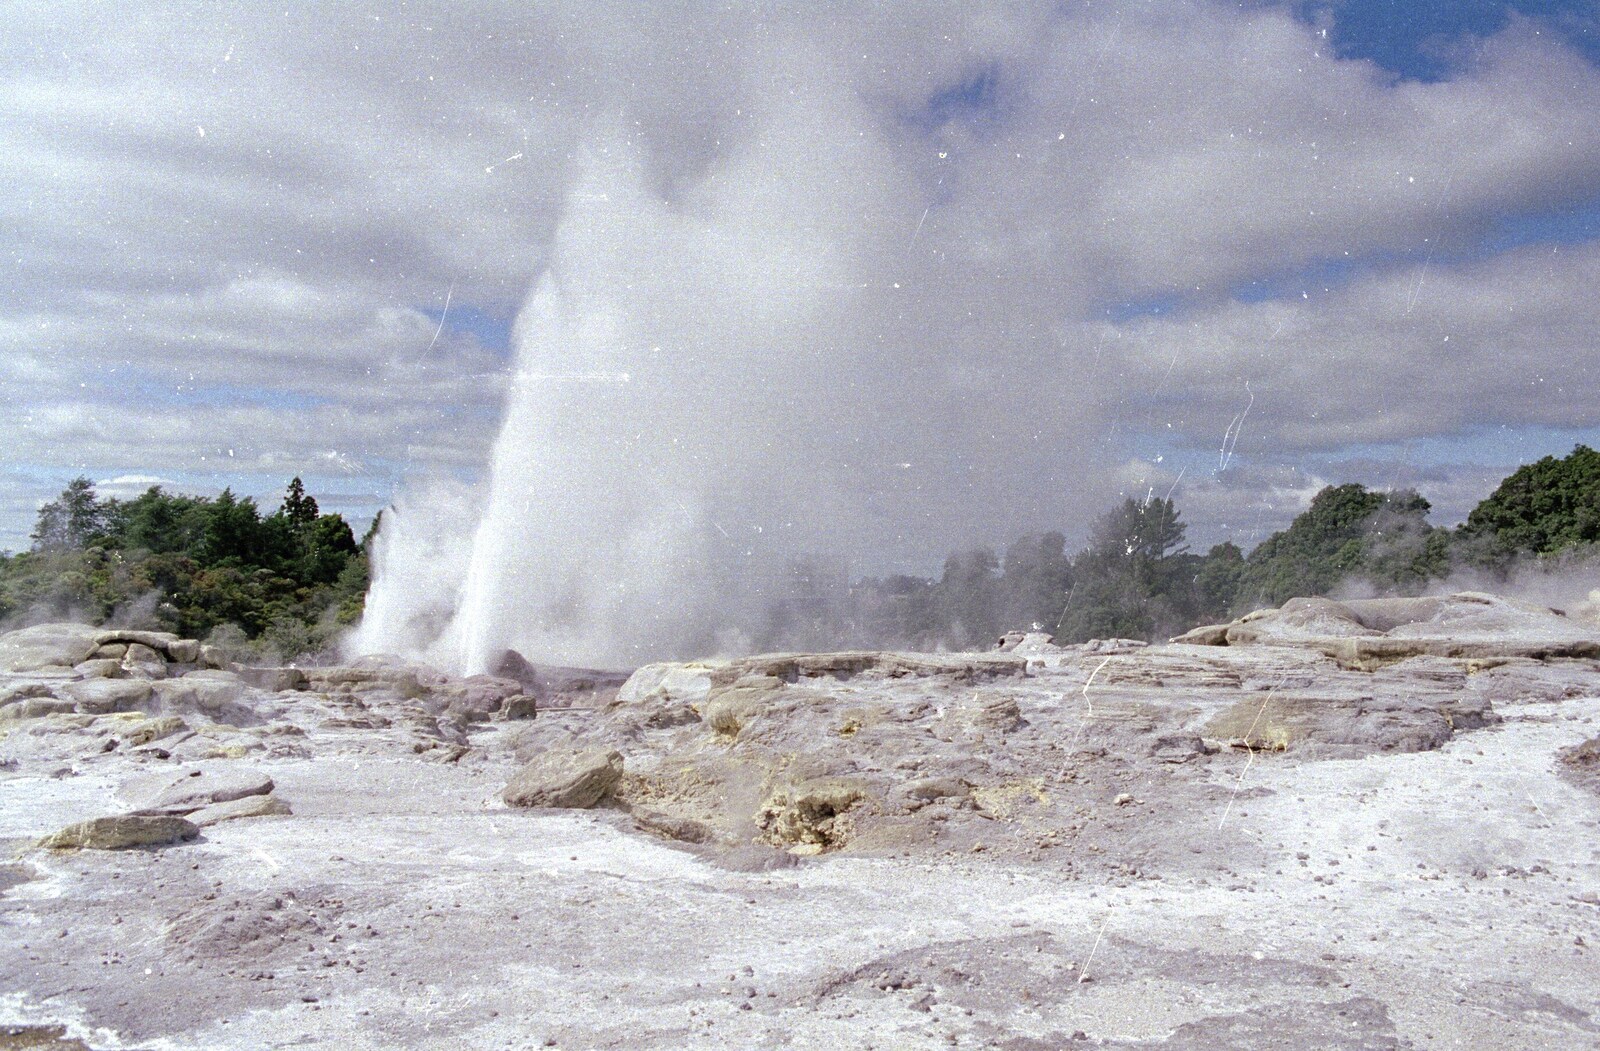 Another view of the geyser at Rotorua from A Road-trip Through Rotorua to Palmerston, North Island, New Zealand - 27th November 1992